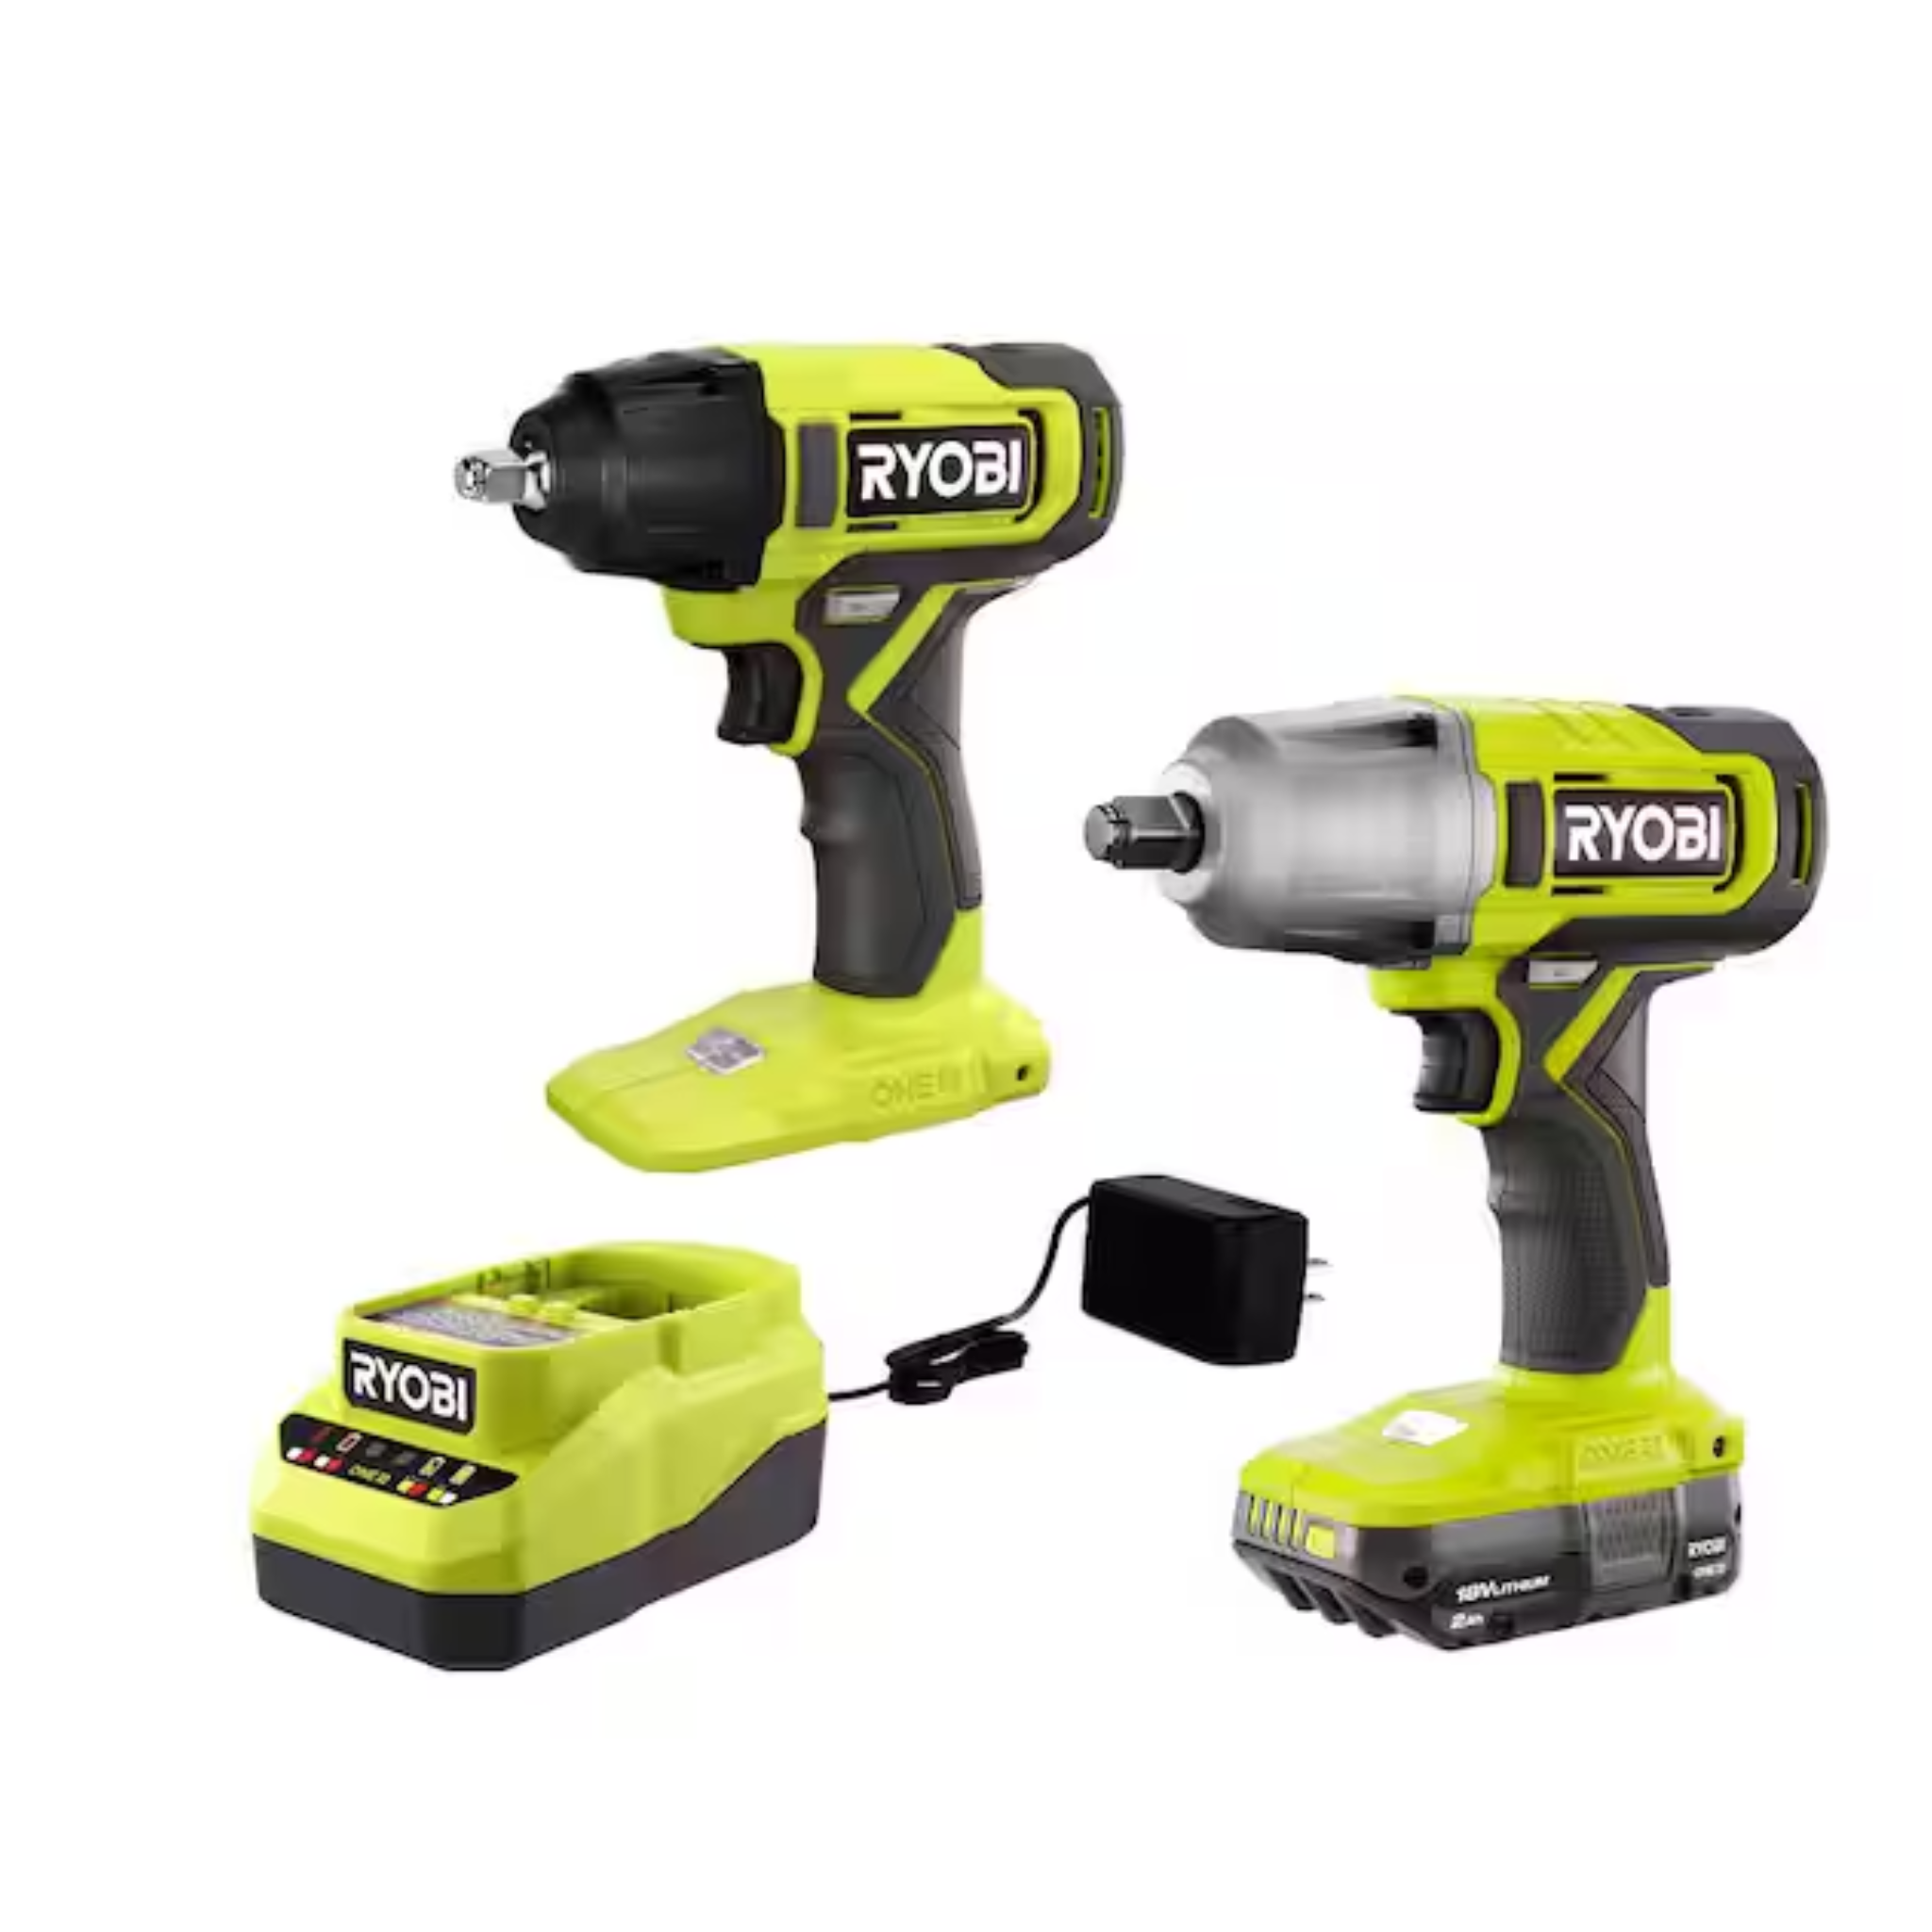 RYOBI ONE+ 18V Combo Kit w/ 1/2" + 3/8" Impact Wrench, 2.0Ah Battery, & Charger